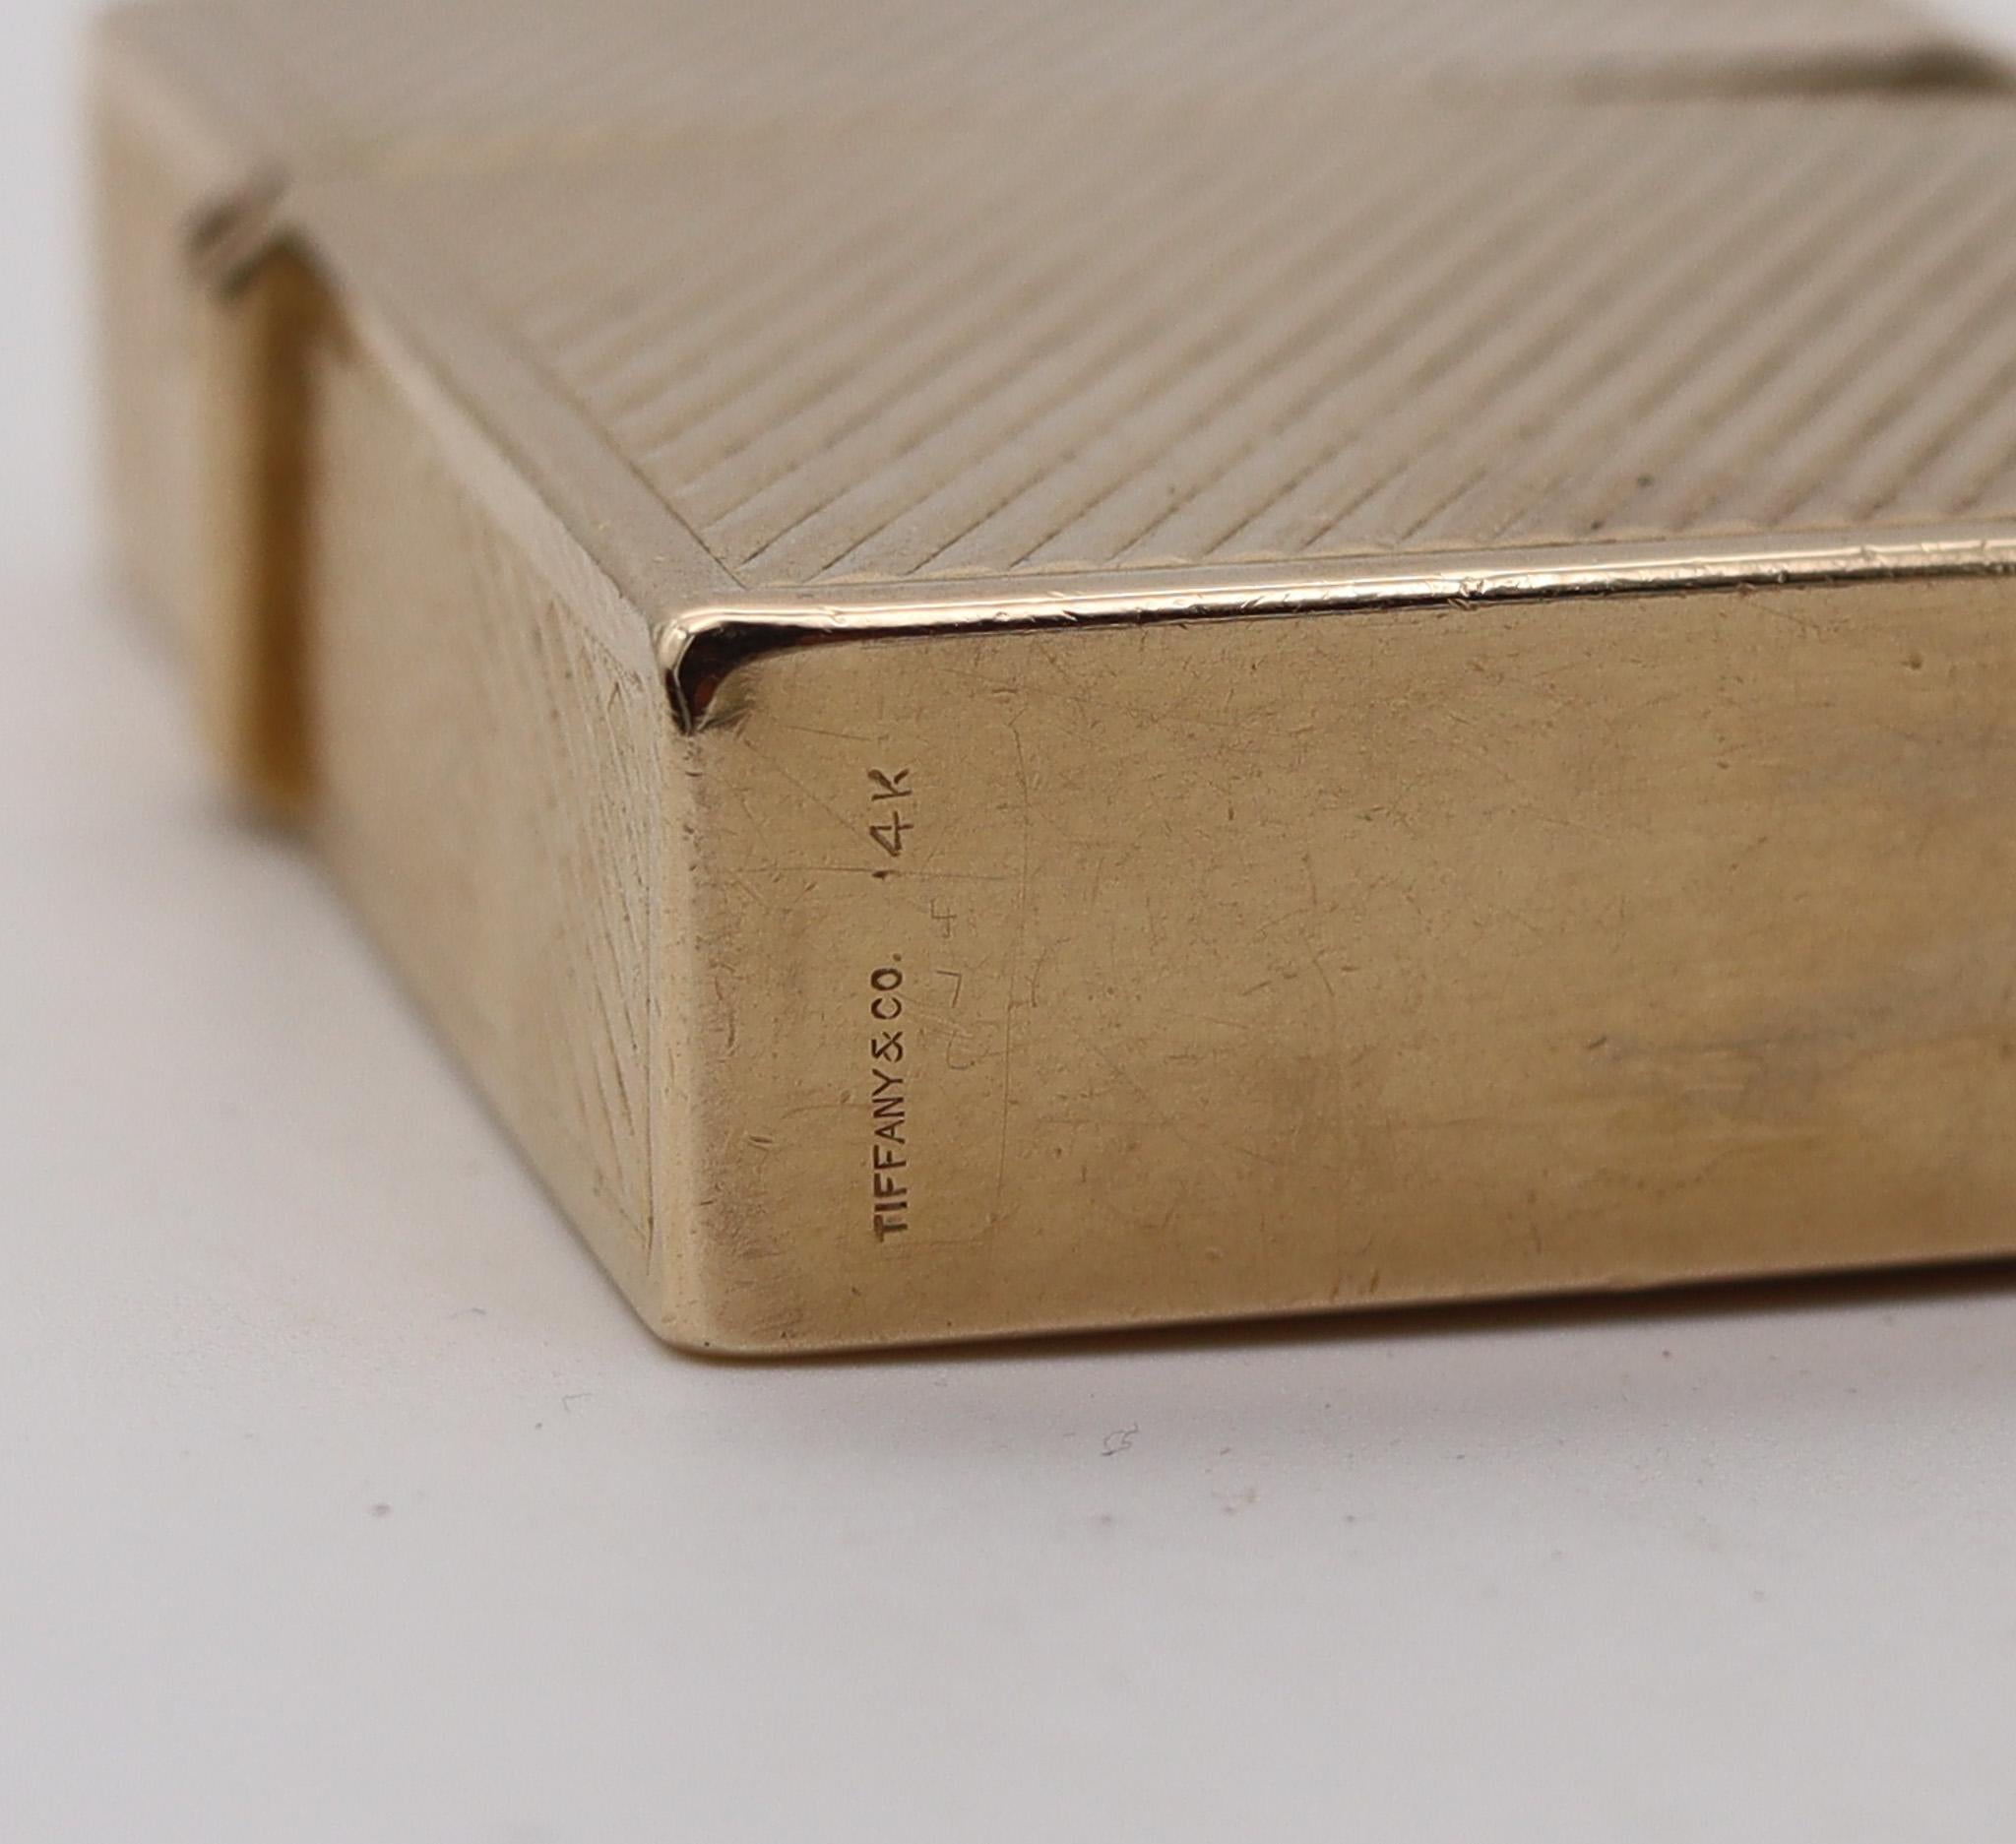 Tiffany & Co. 1960 Modernist Zippo Petrol Fluid Pocket Lighter 14Kt Yellow Gold In Excellent Condition For Sale In Miami, FL